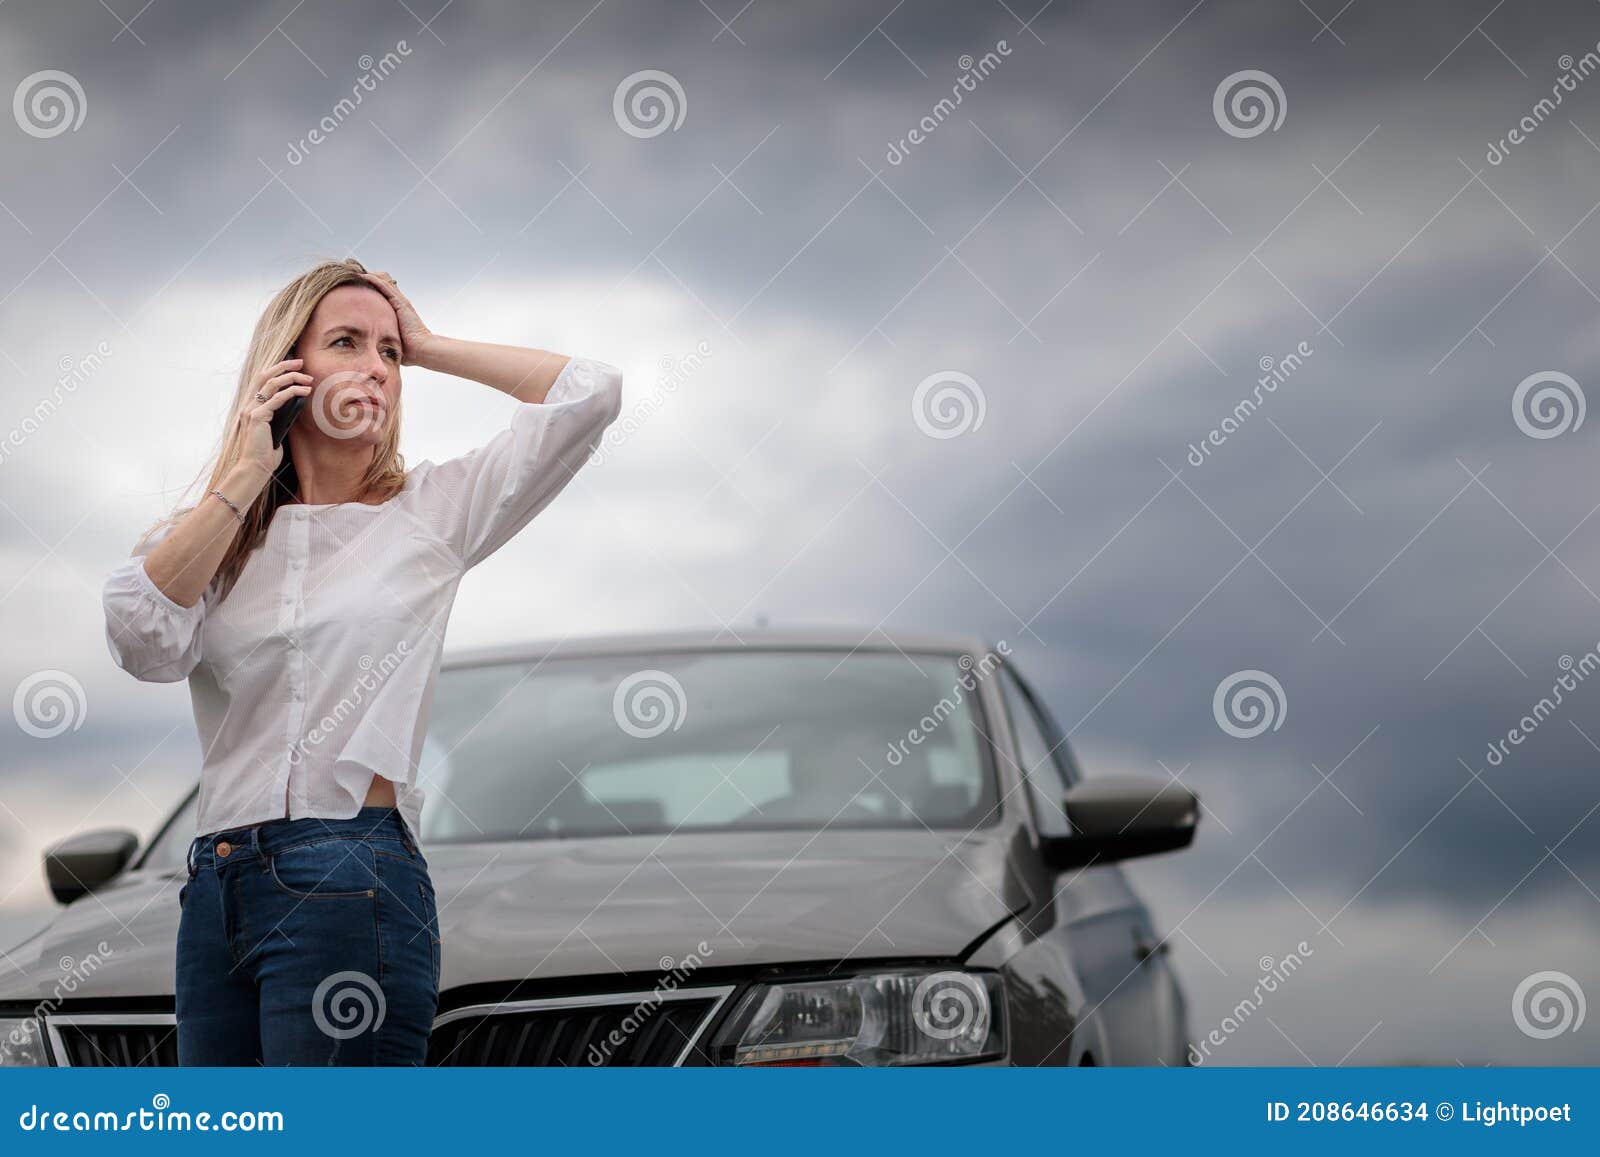 pretty middle aged woman having car troubles